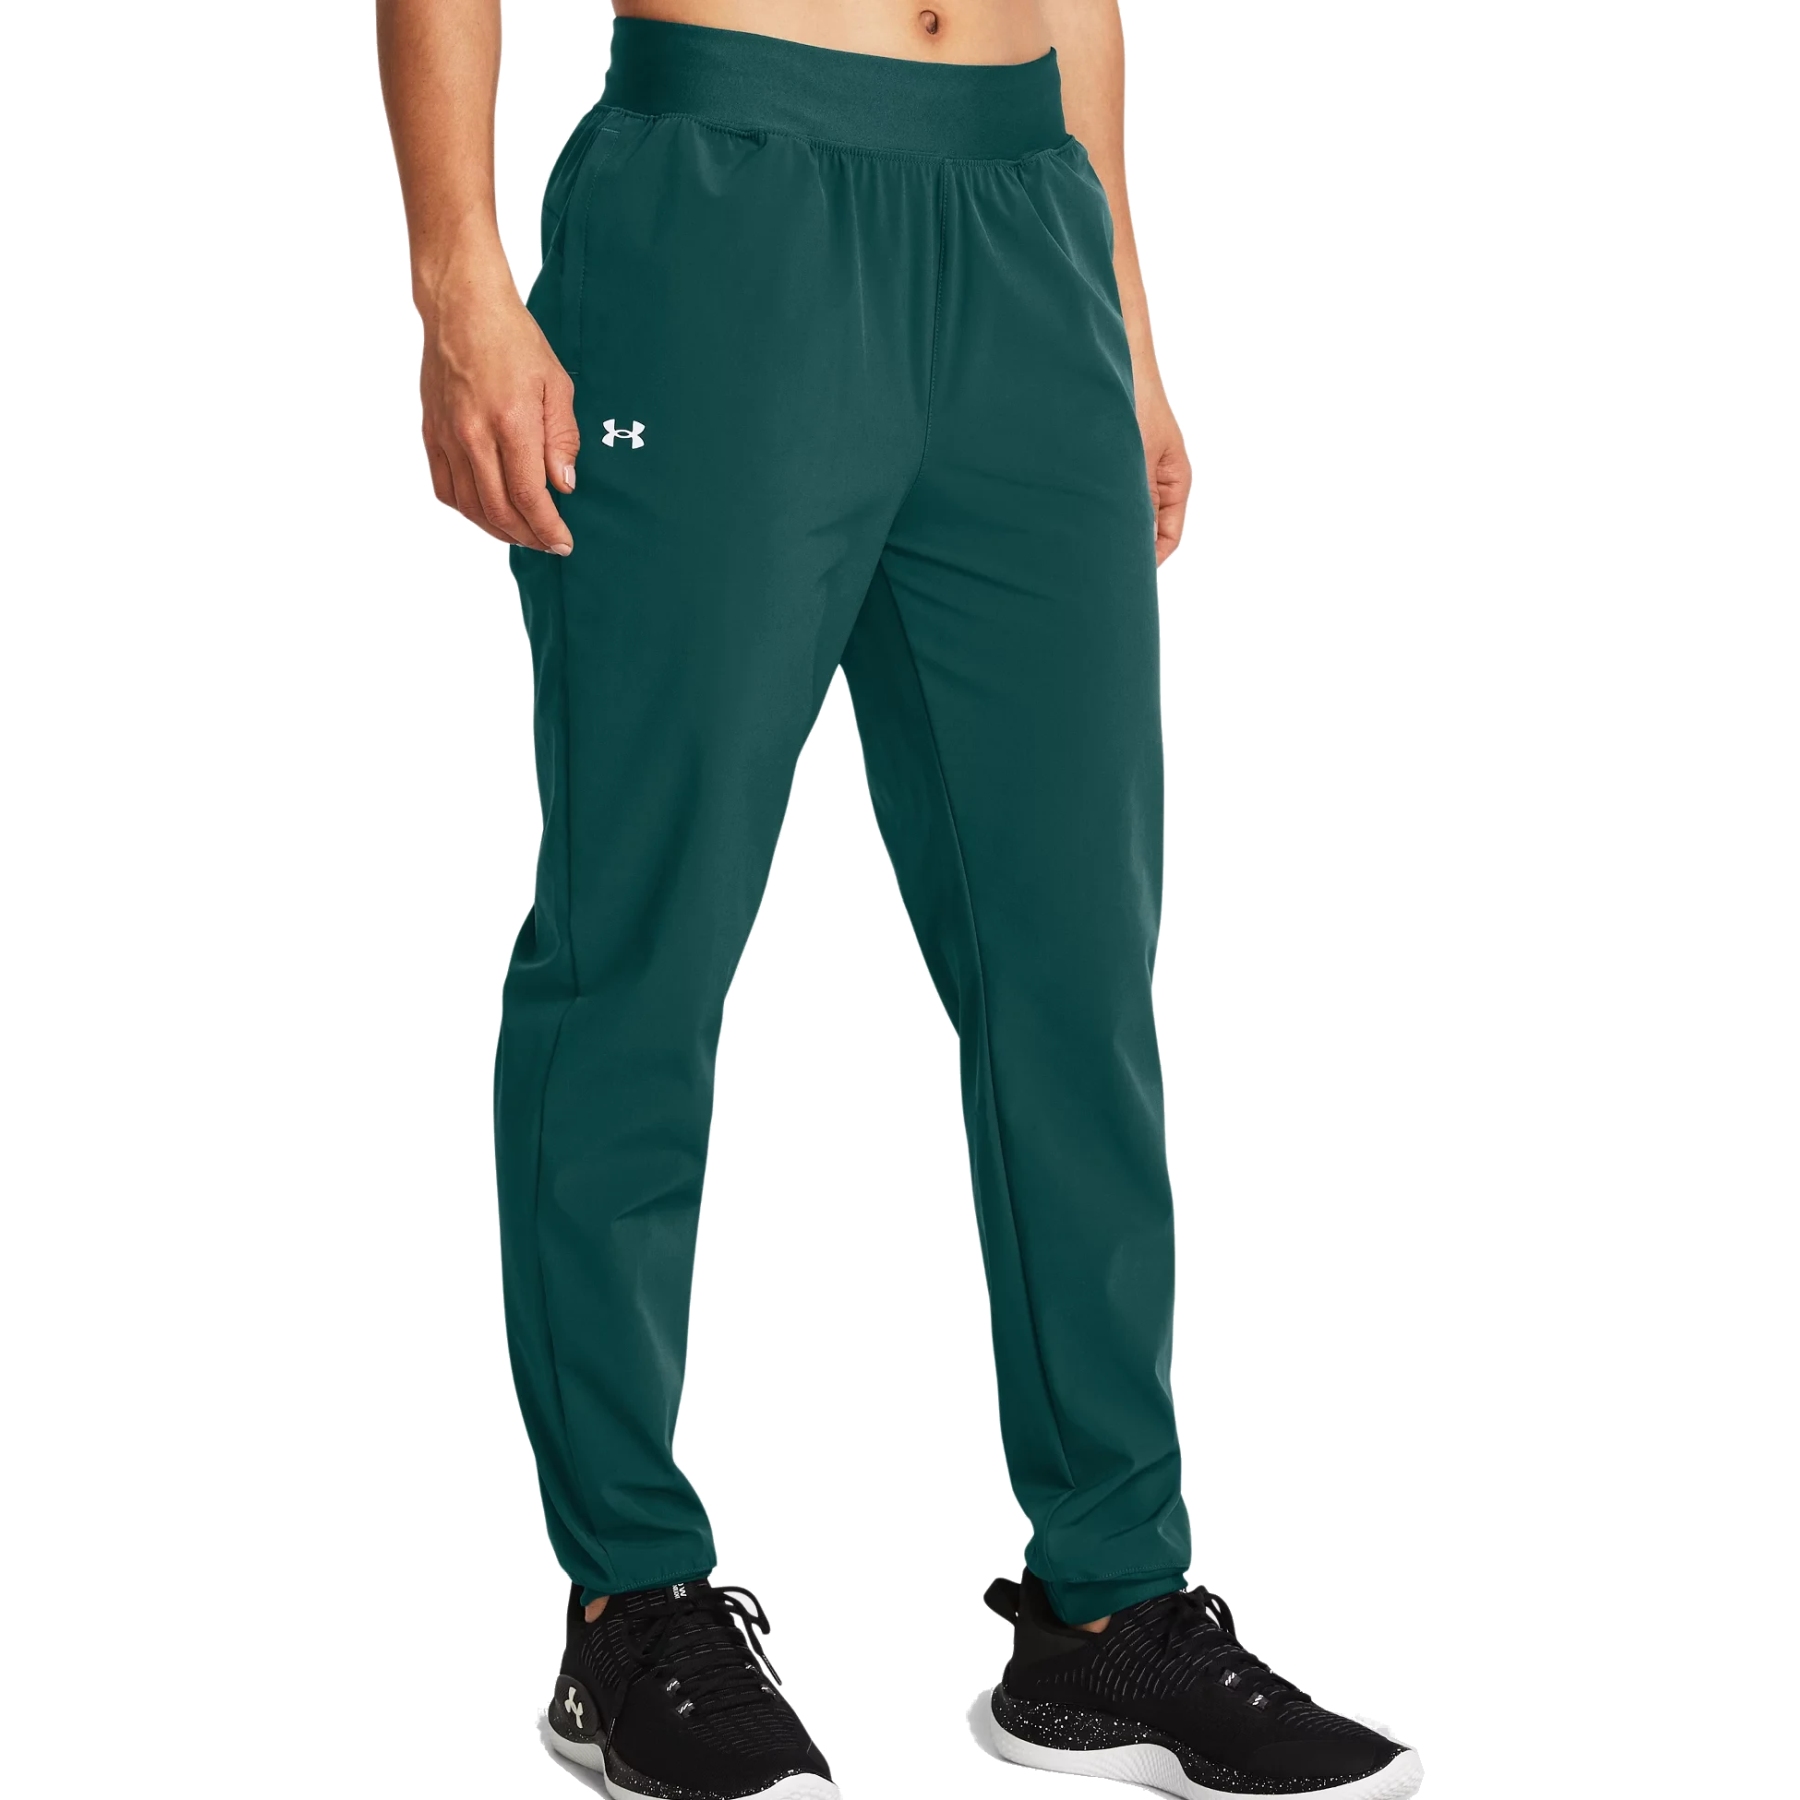 Under Armour UA Armour Sport Woven Pants for Ladies